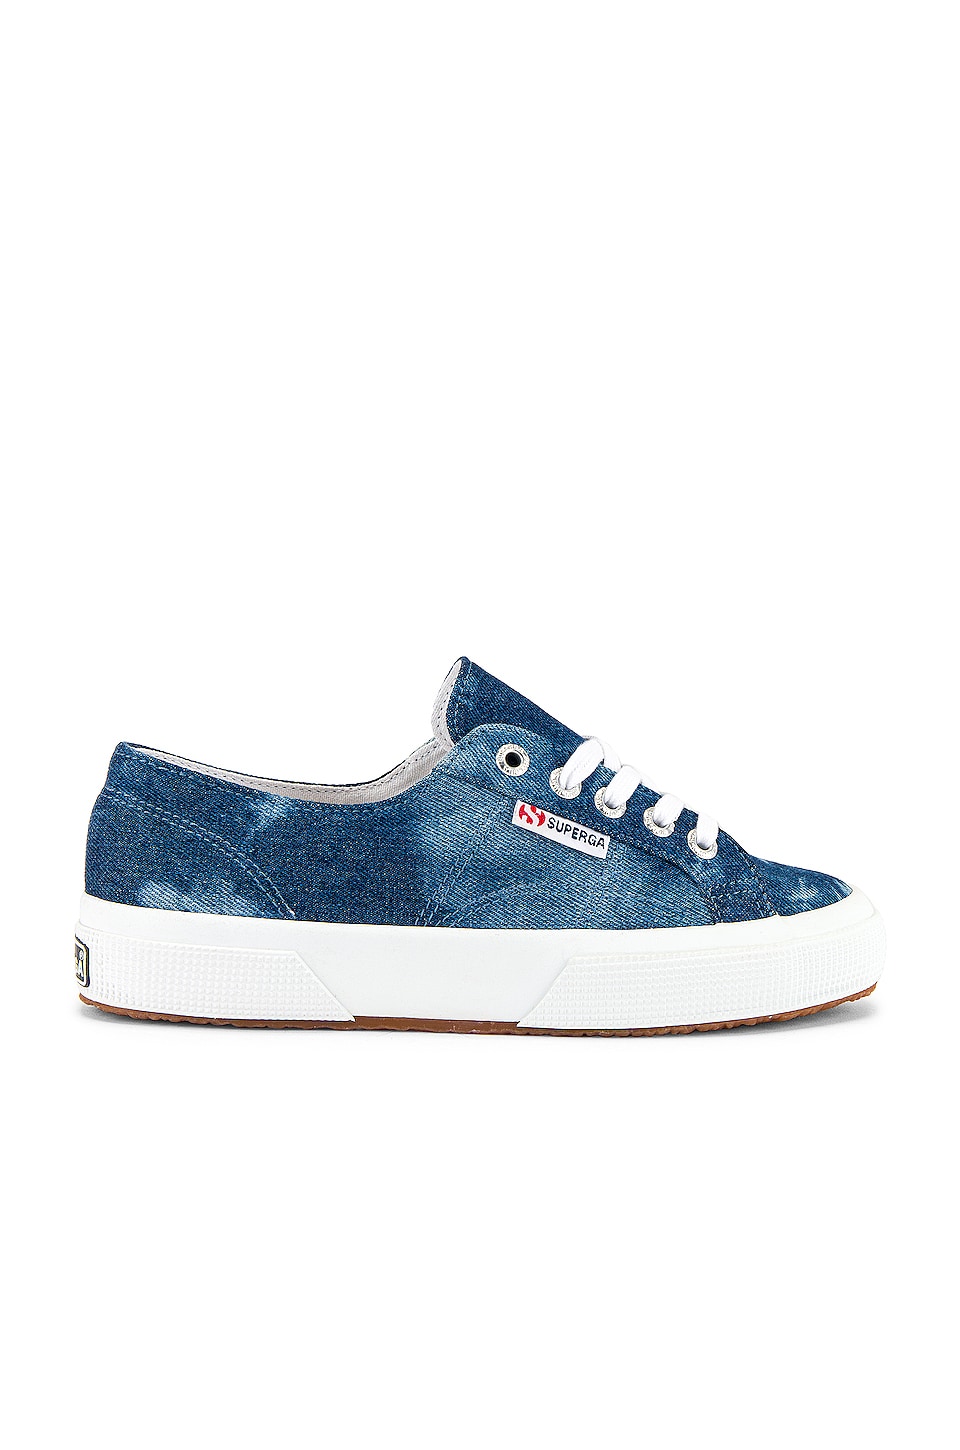 superga 2750 suede lace up sneakers